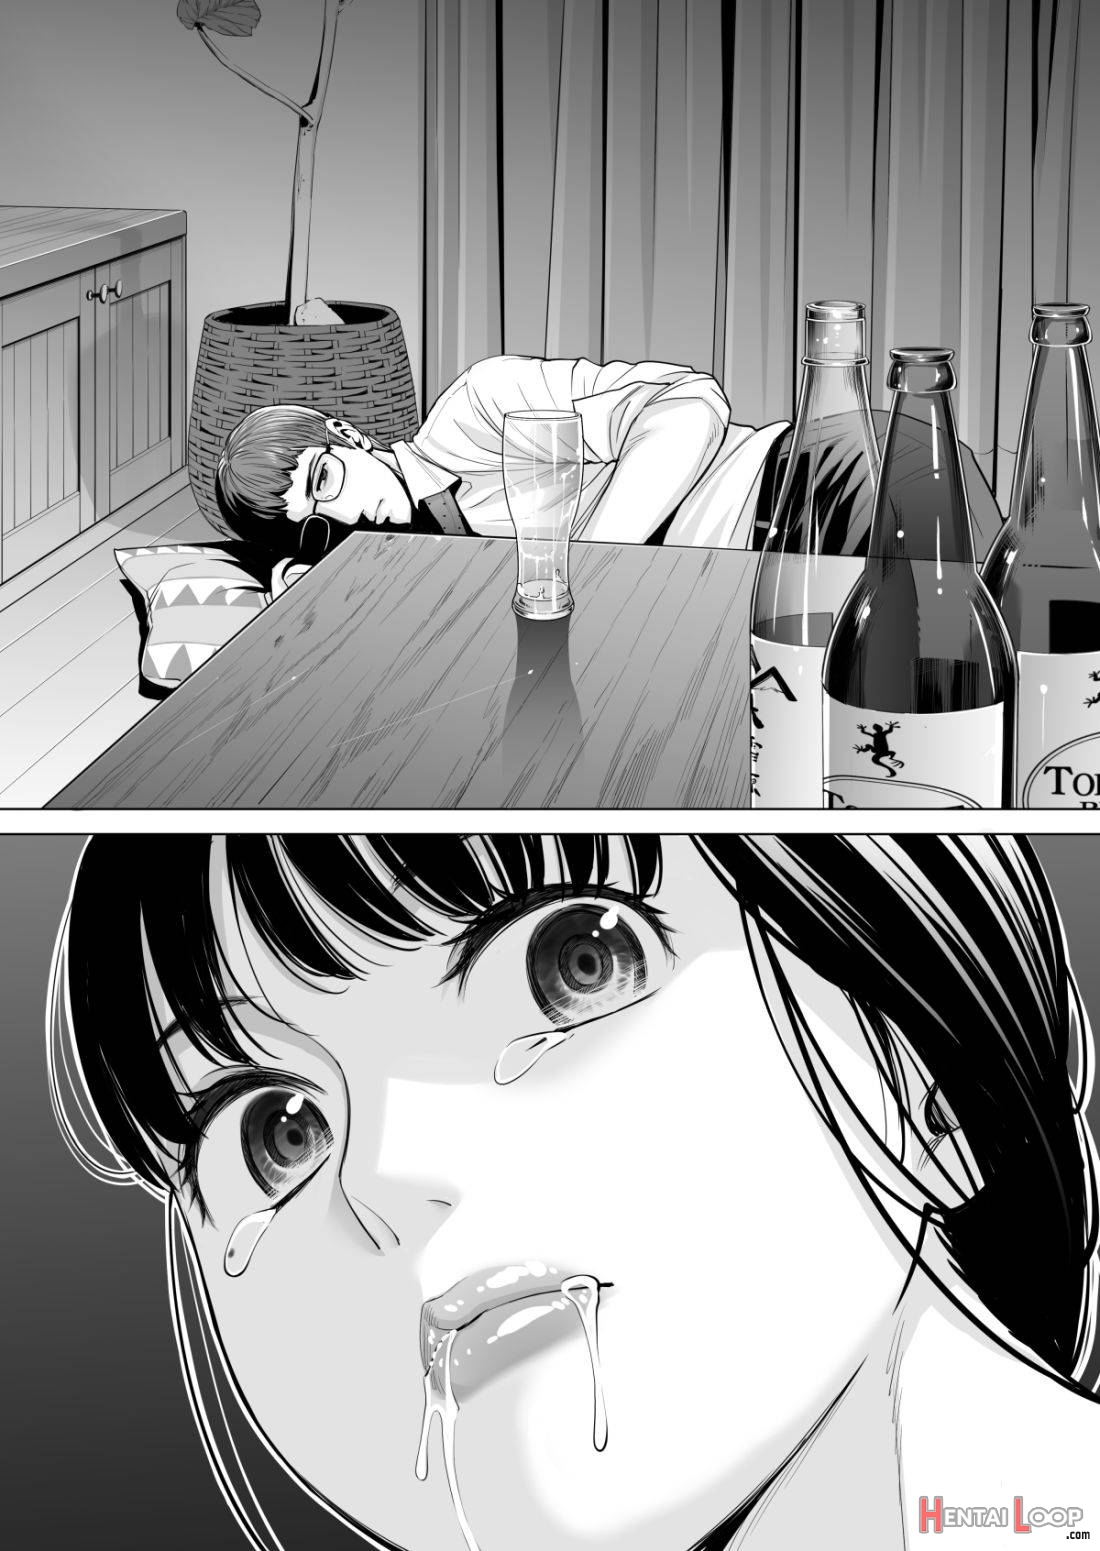 Tsukiyo no Midare Zake (Zenpen) Moonlit Intoxication ~ A Housewife Stolen by a Coworker Besides her Blackout Drunk Husband ~ Chapter 1 page 58